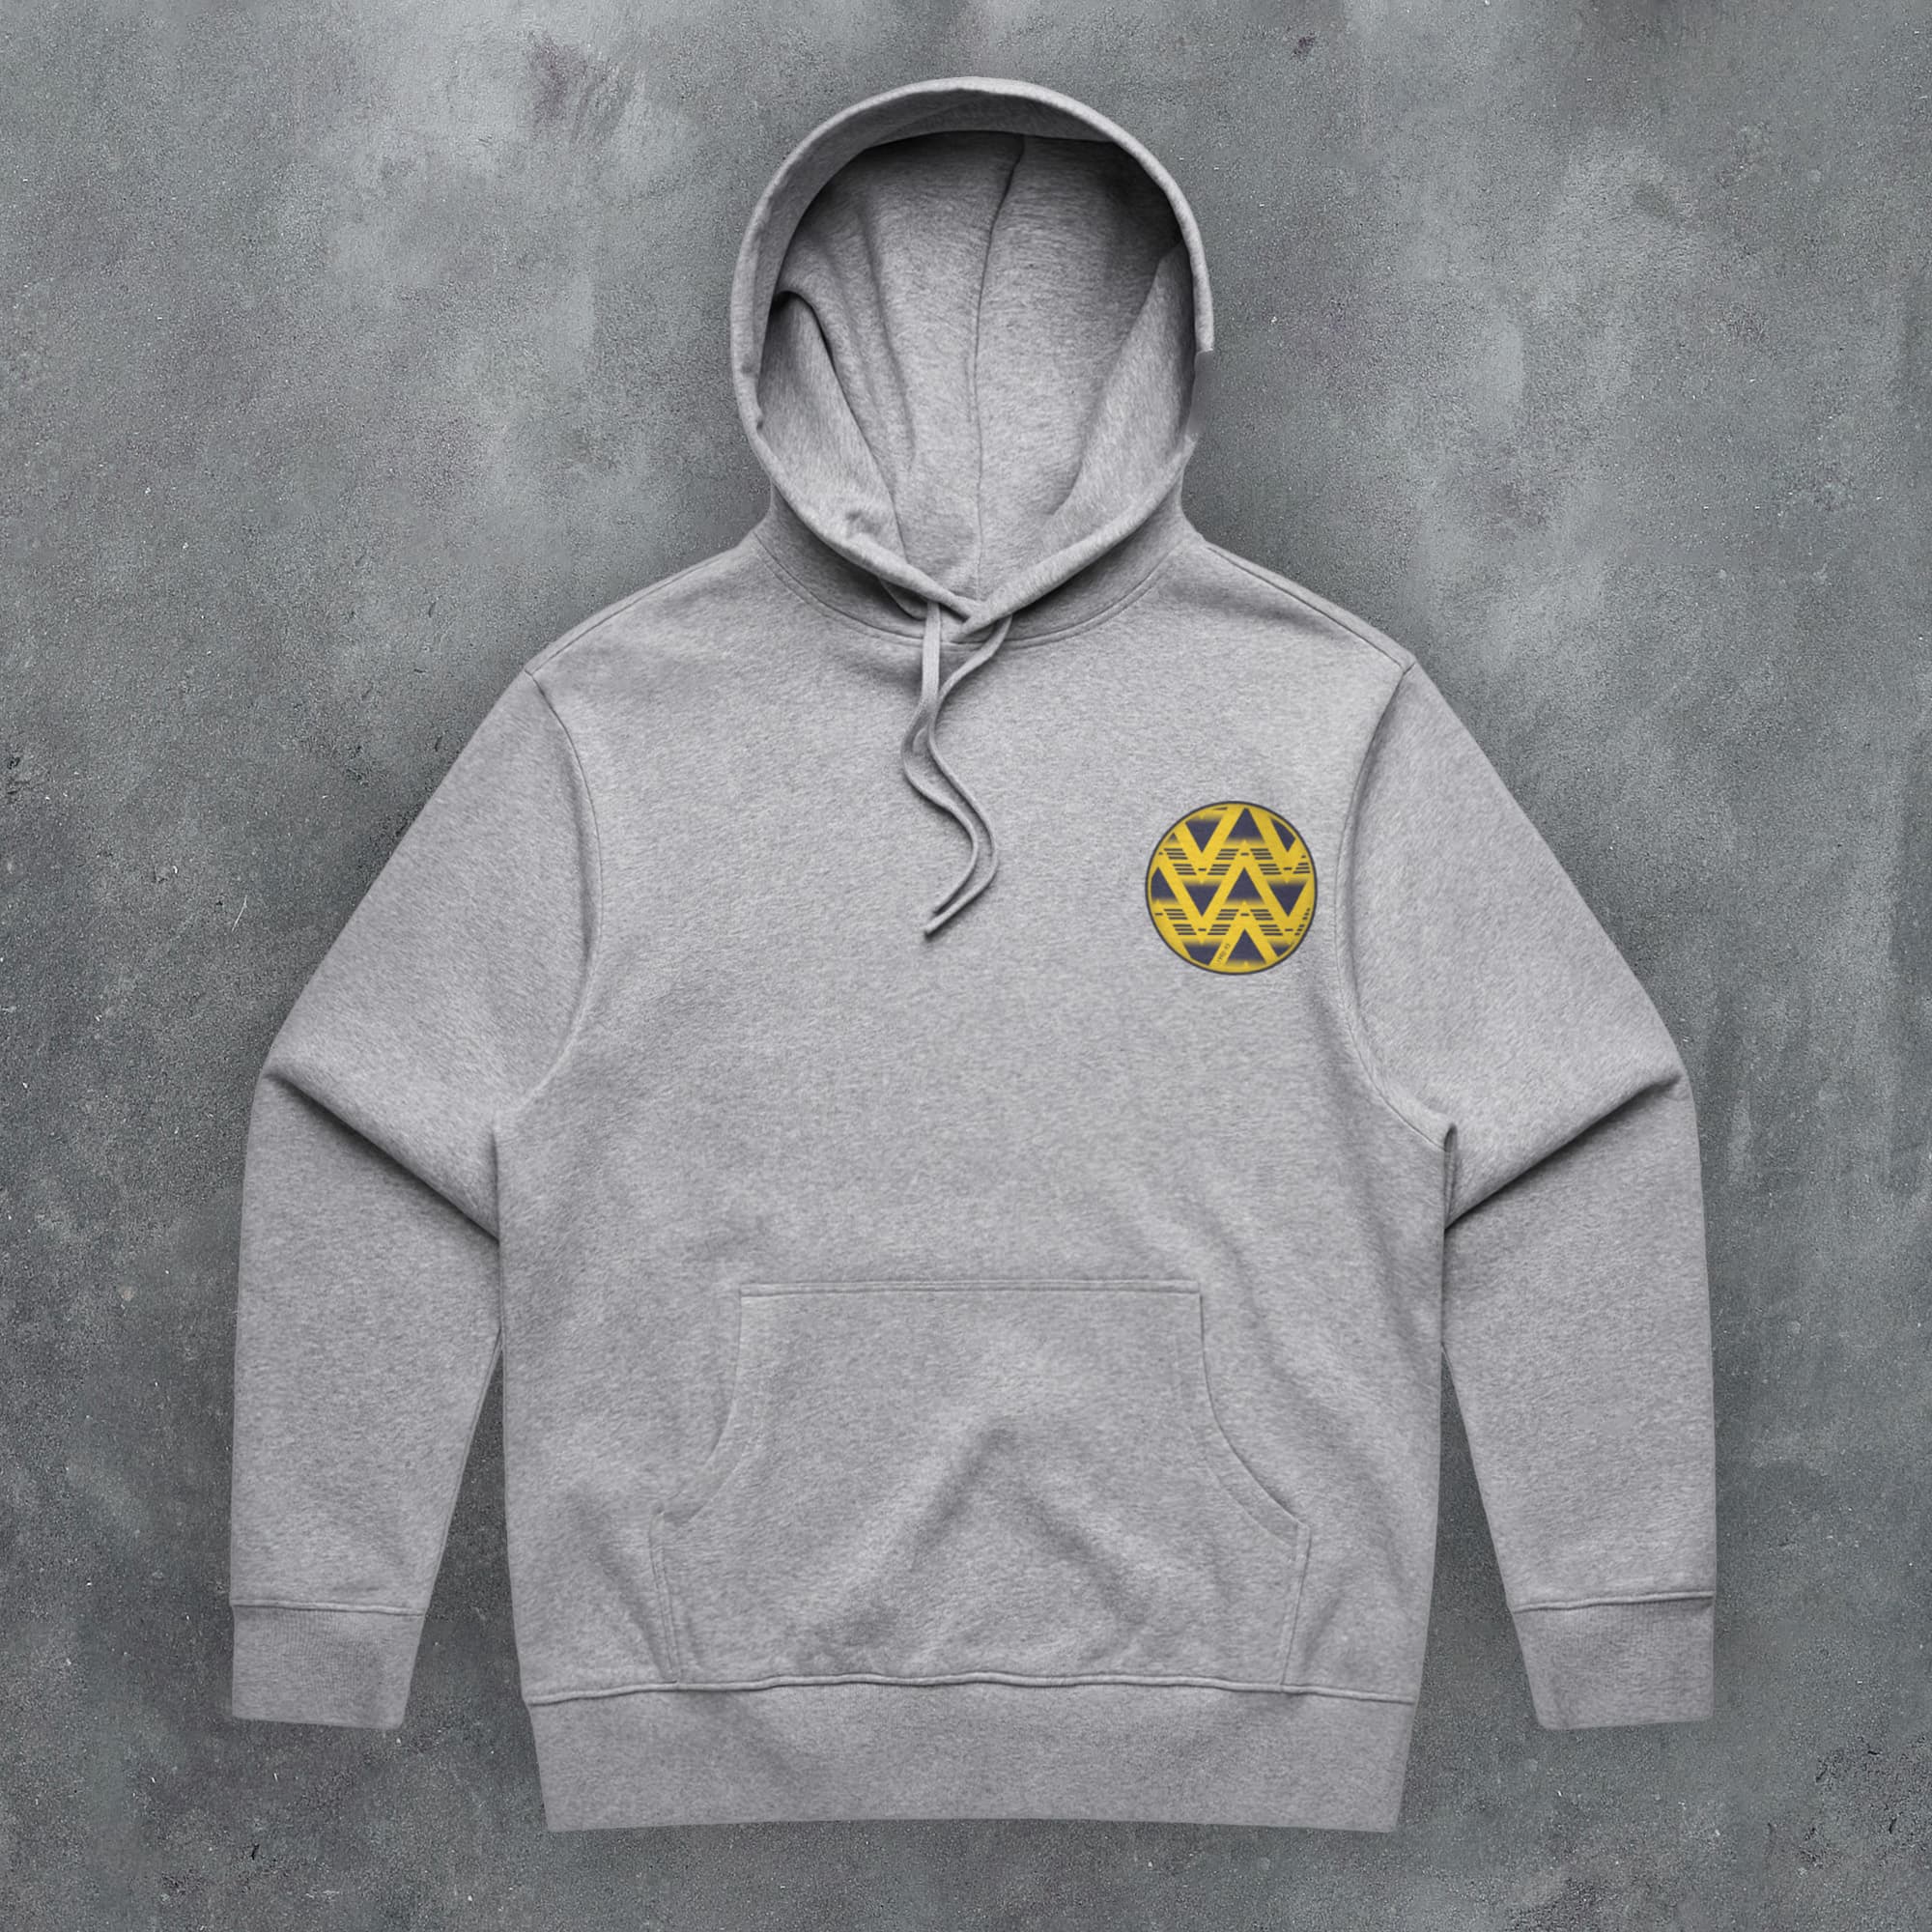 a grey hoodie with a yellow and black logo